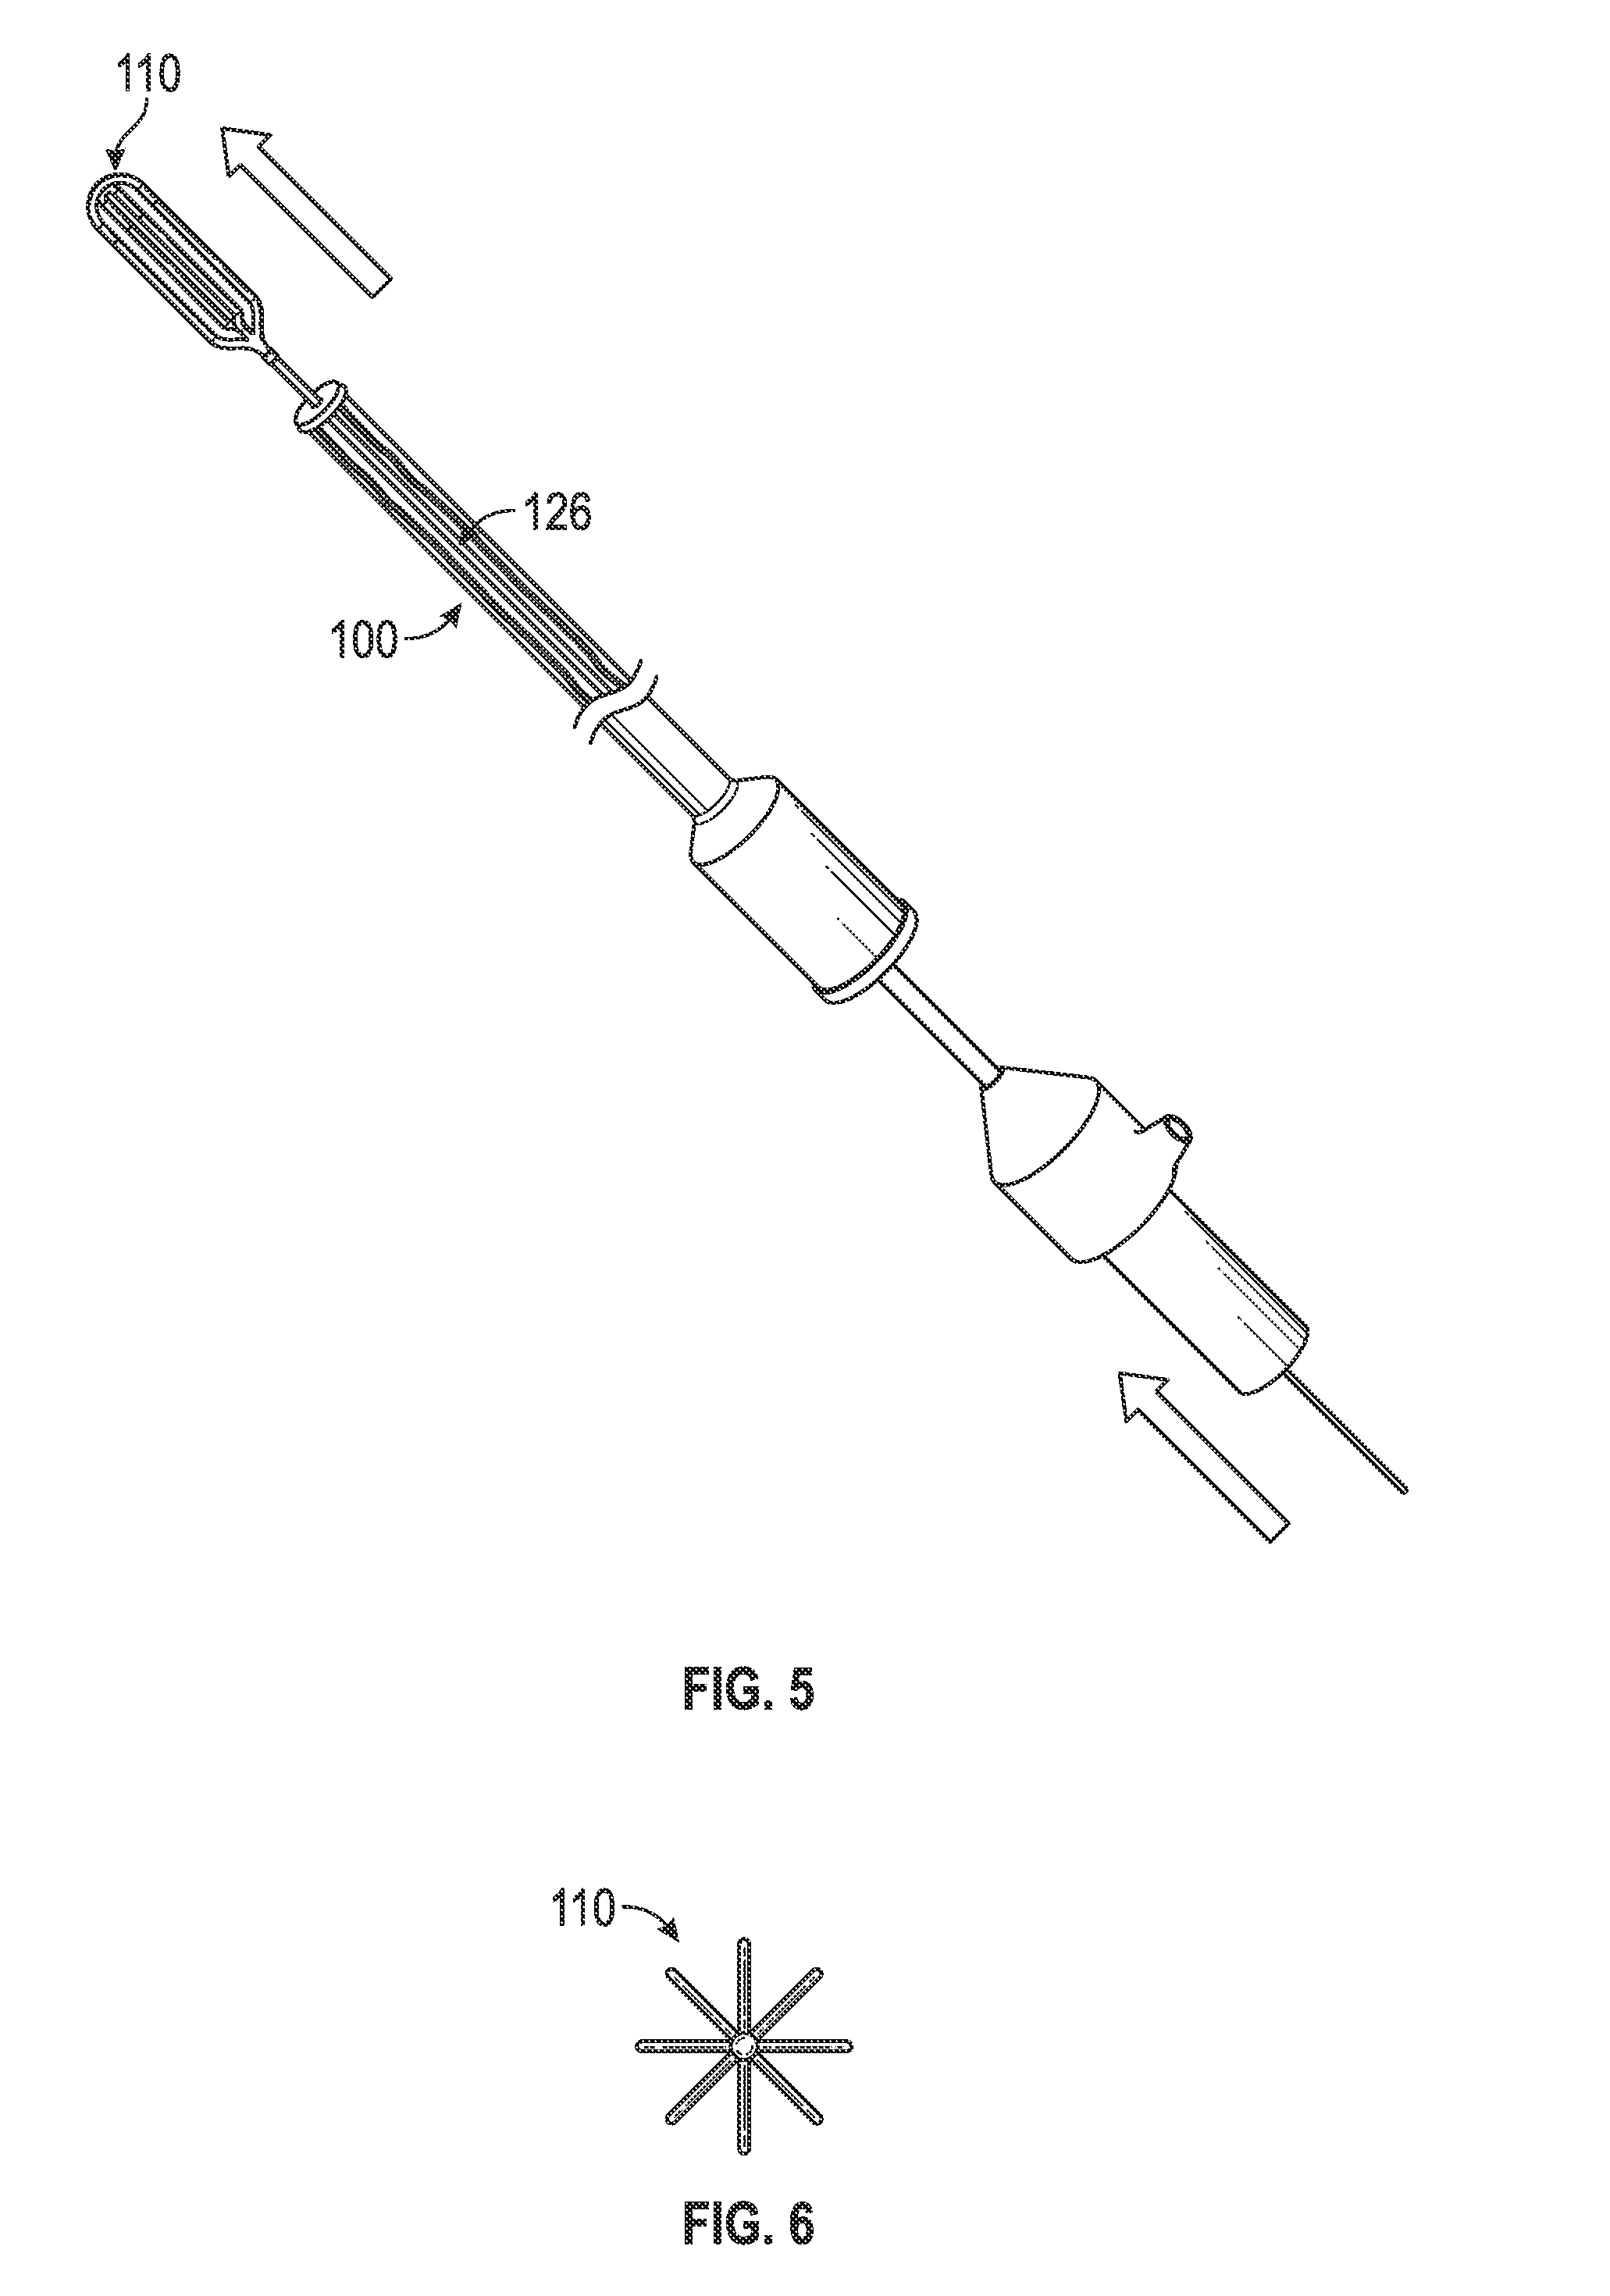 Clot and foreign body retrieval system and method for use